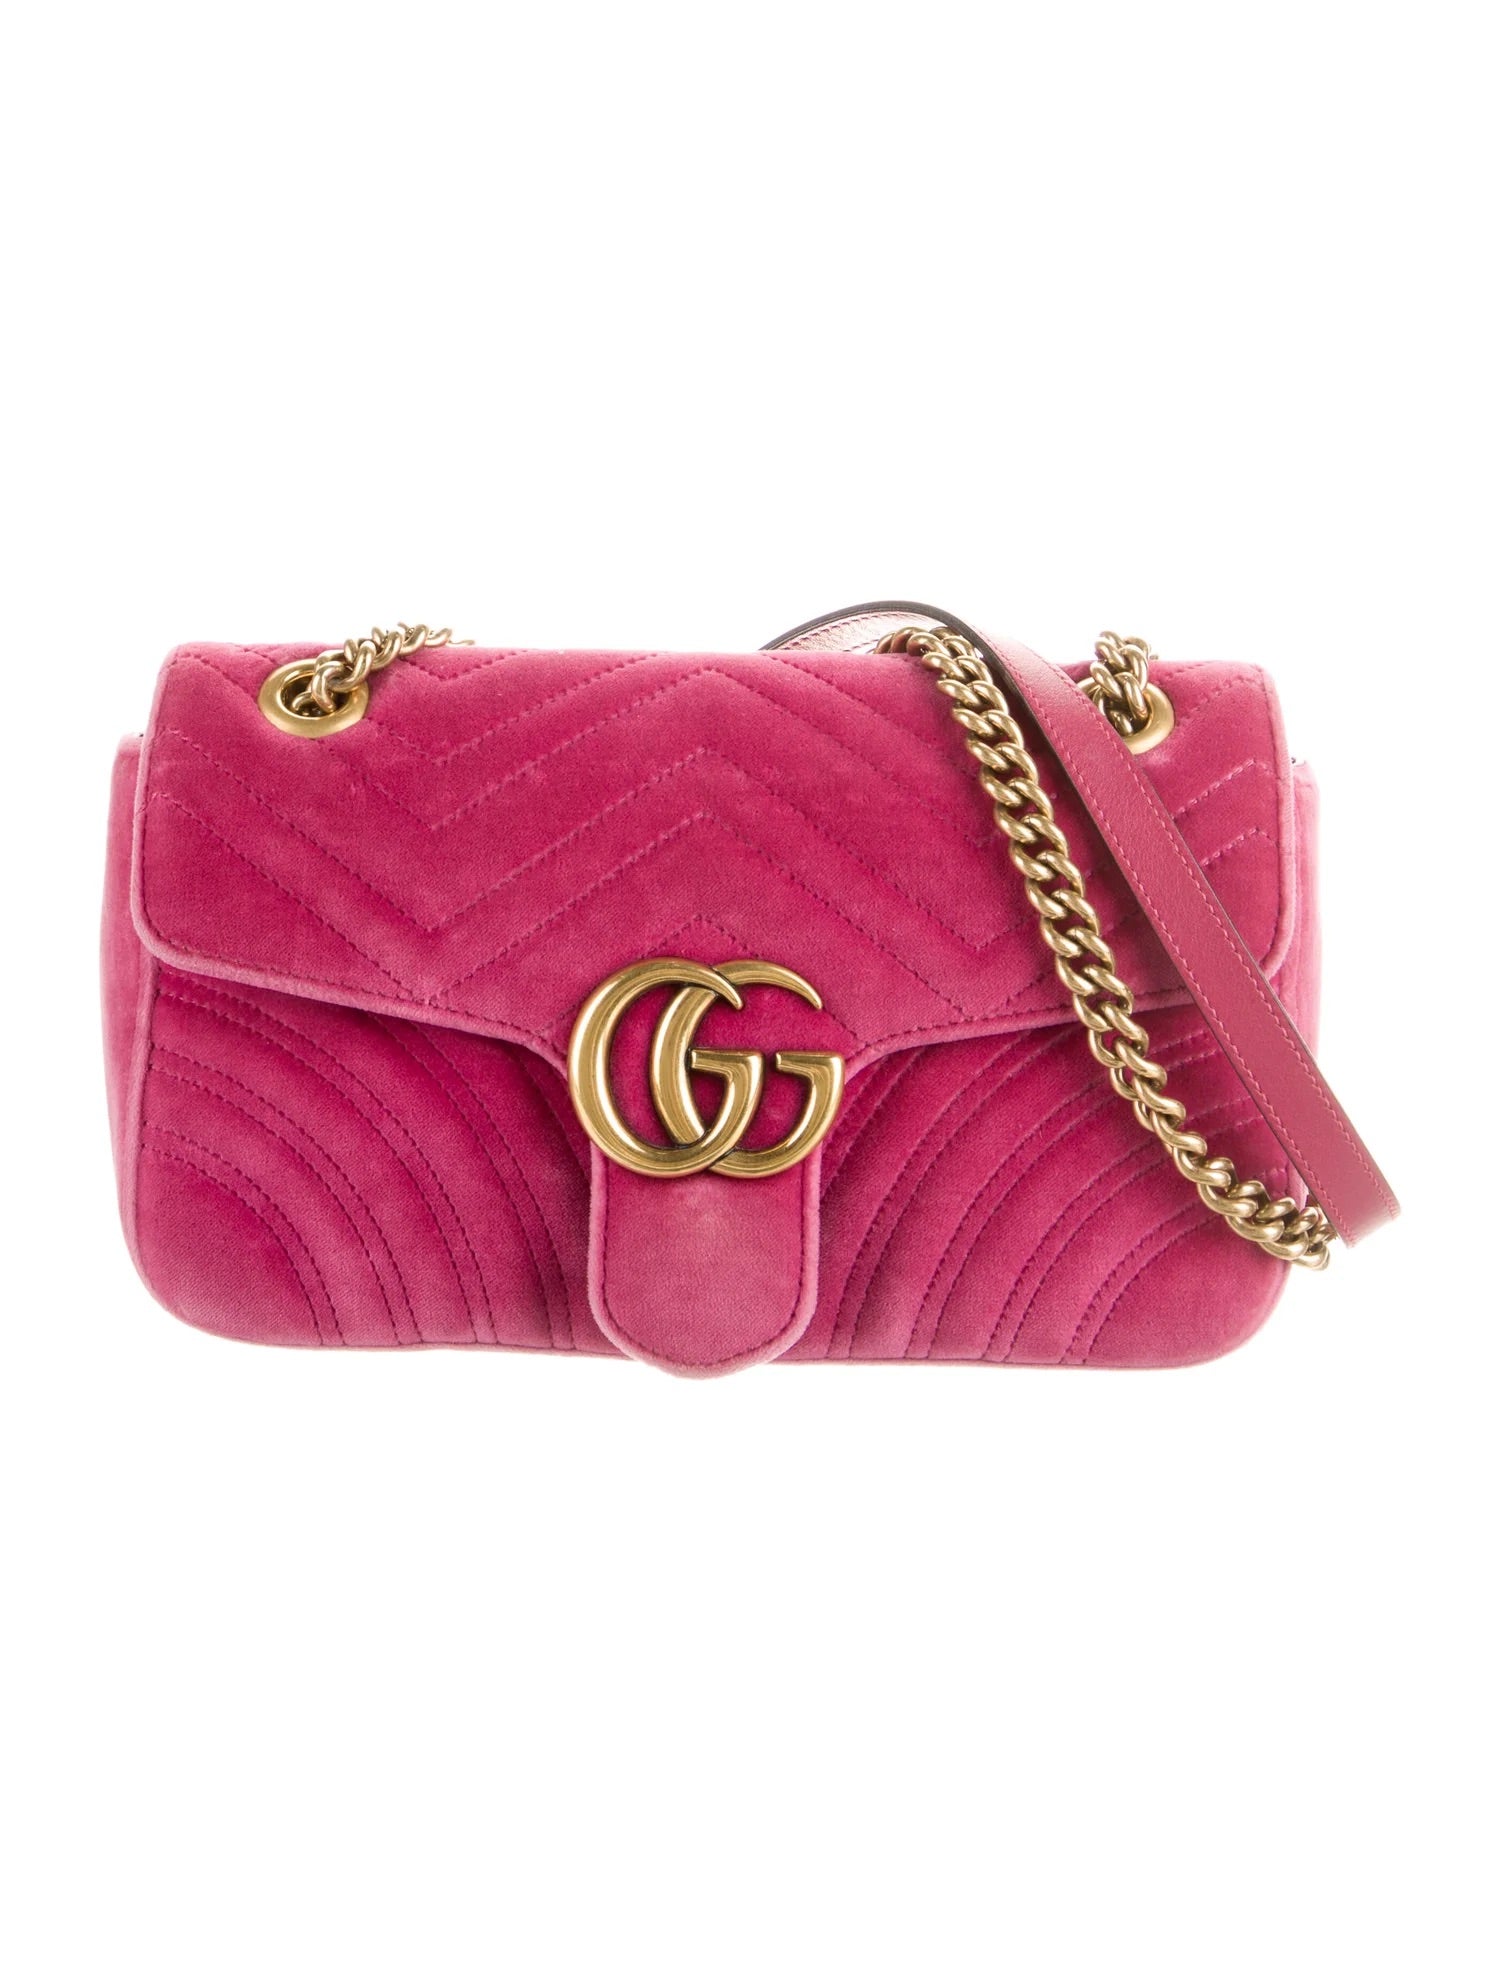 Gucci GG Marmont Heart-shaped Coin Purse in Pink